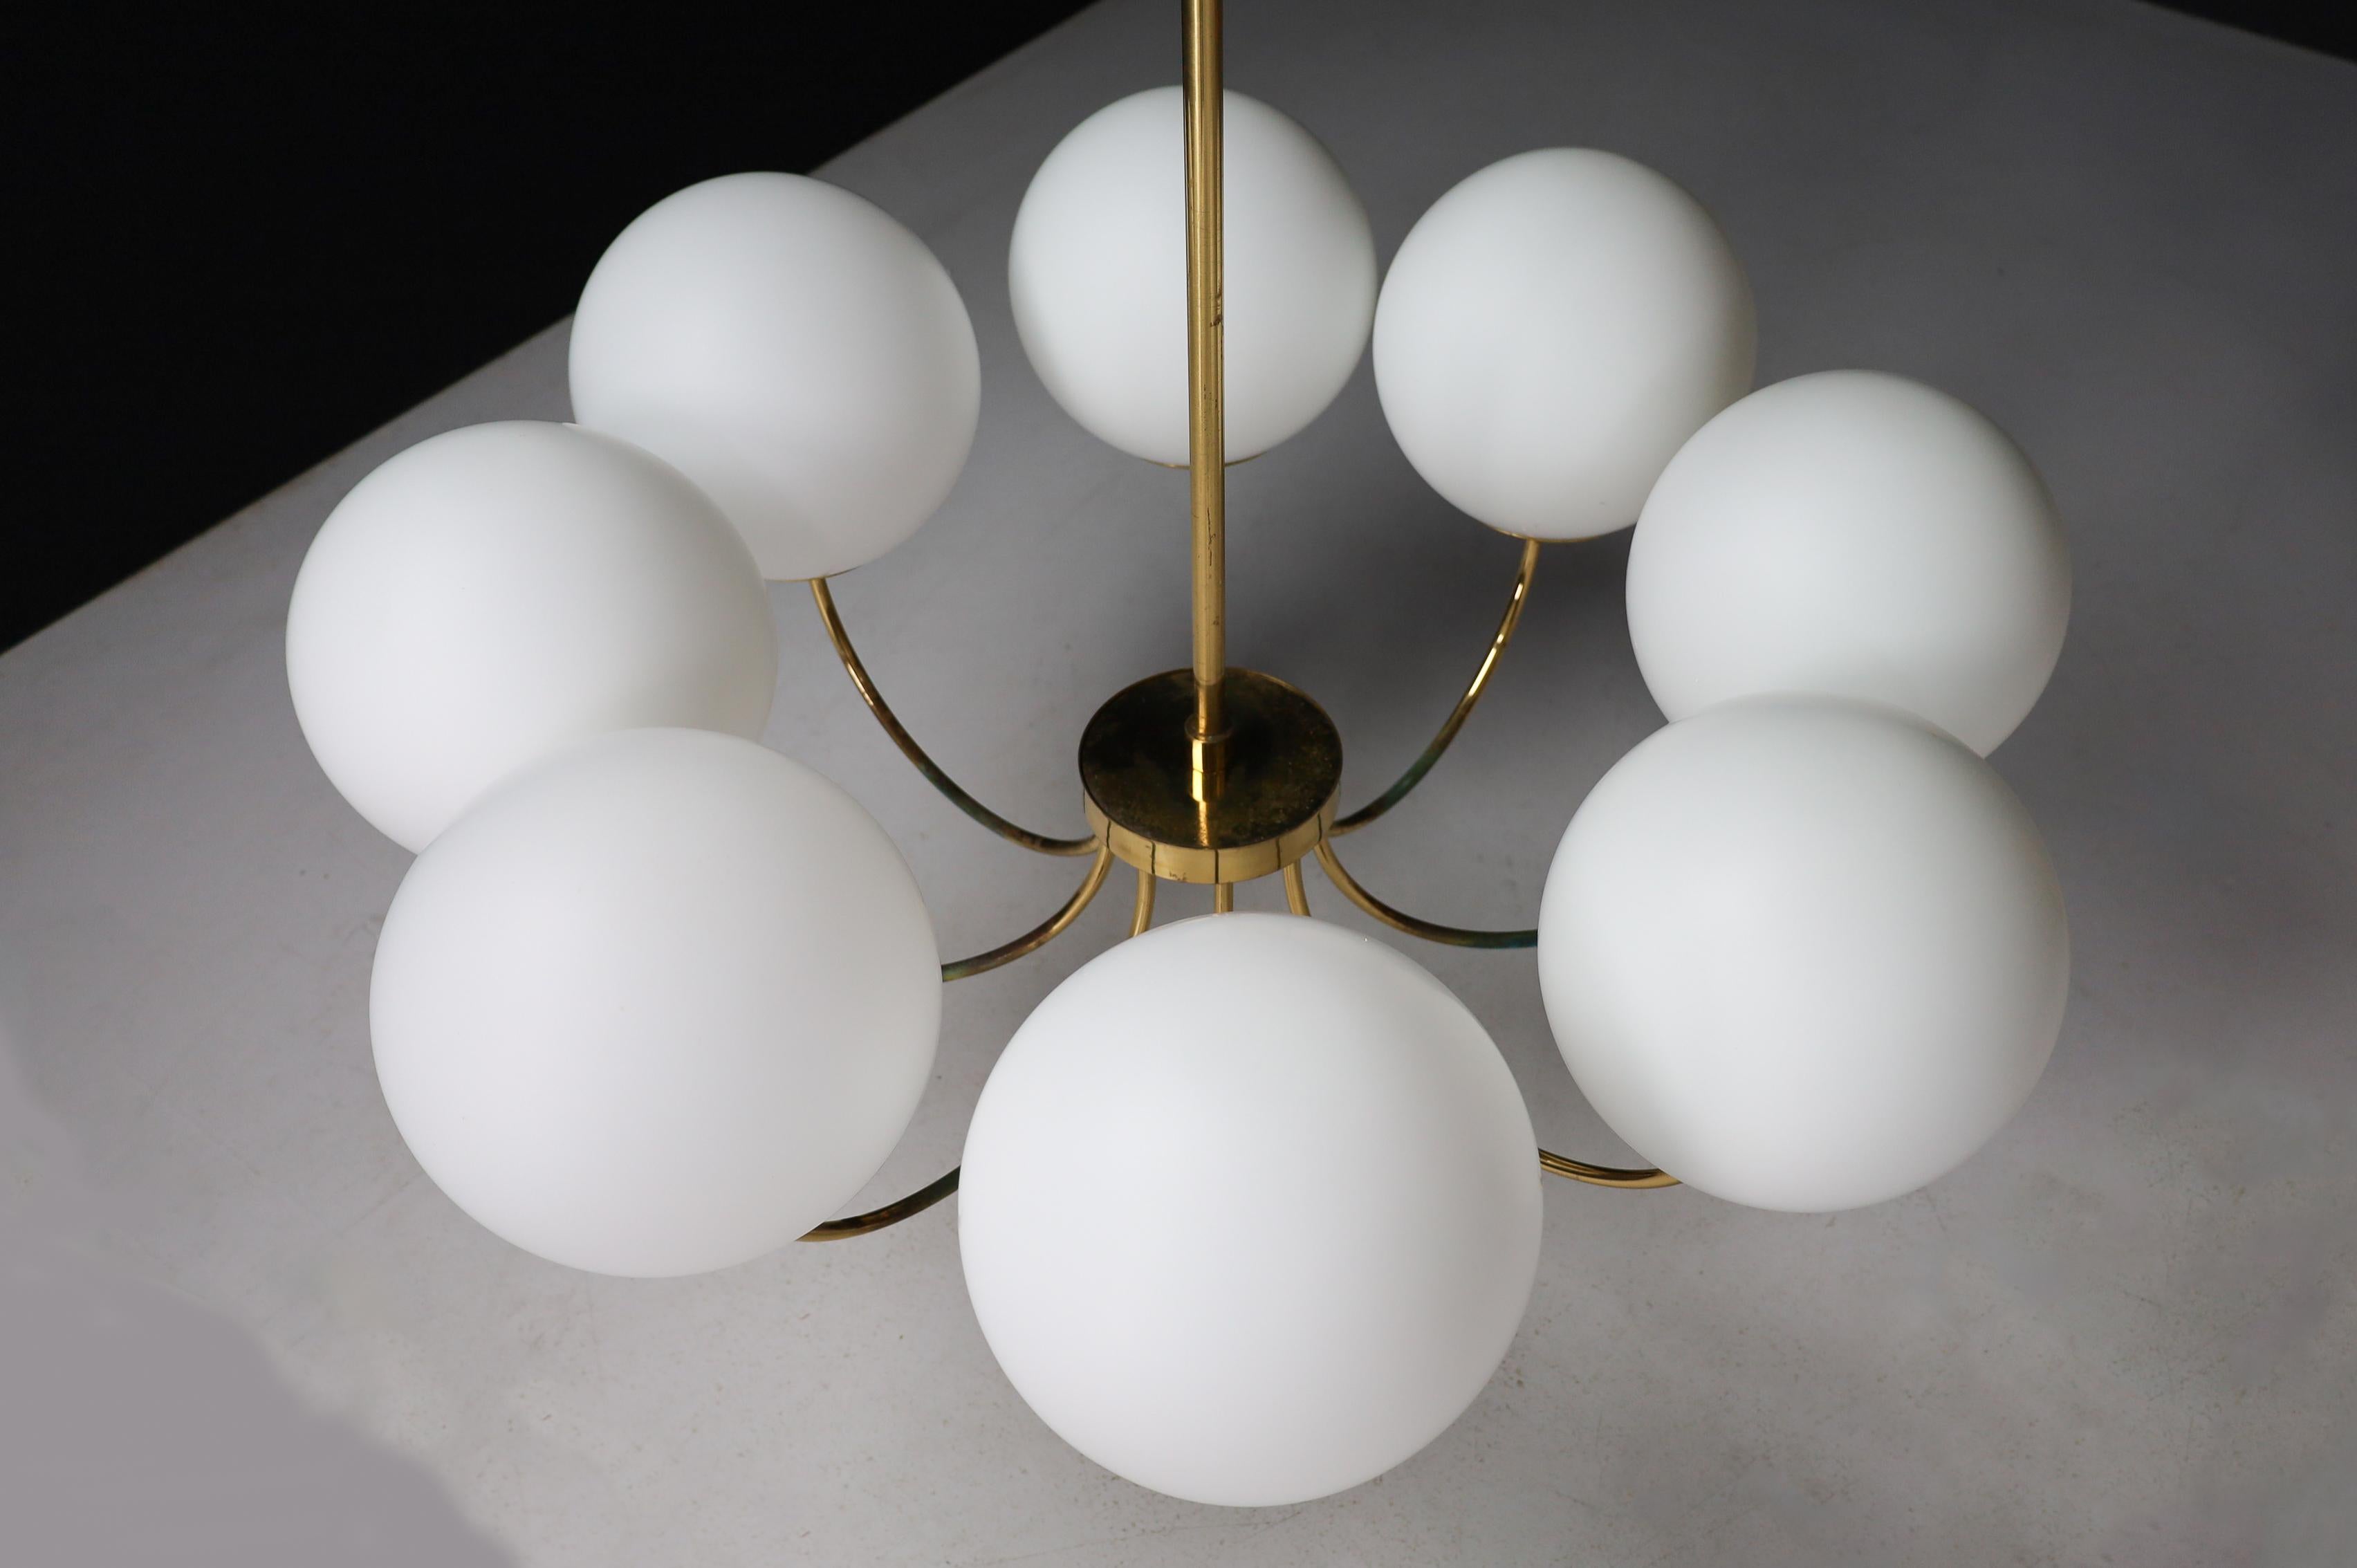 1 of 3 Elegant Chandeliers with Brass Fixture and Opaline Glass Globes, 1960s For Sale 9